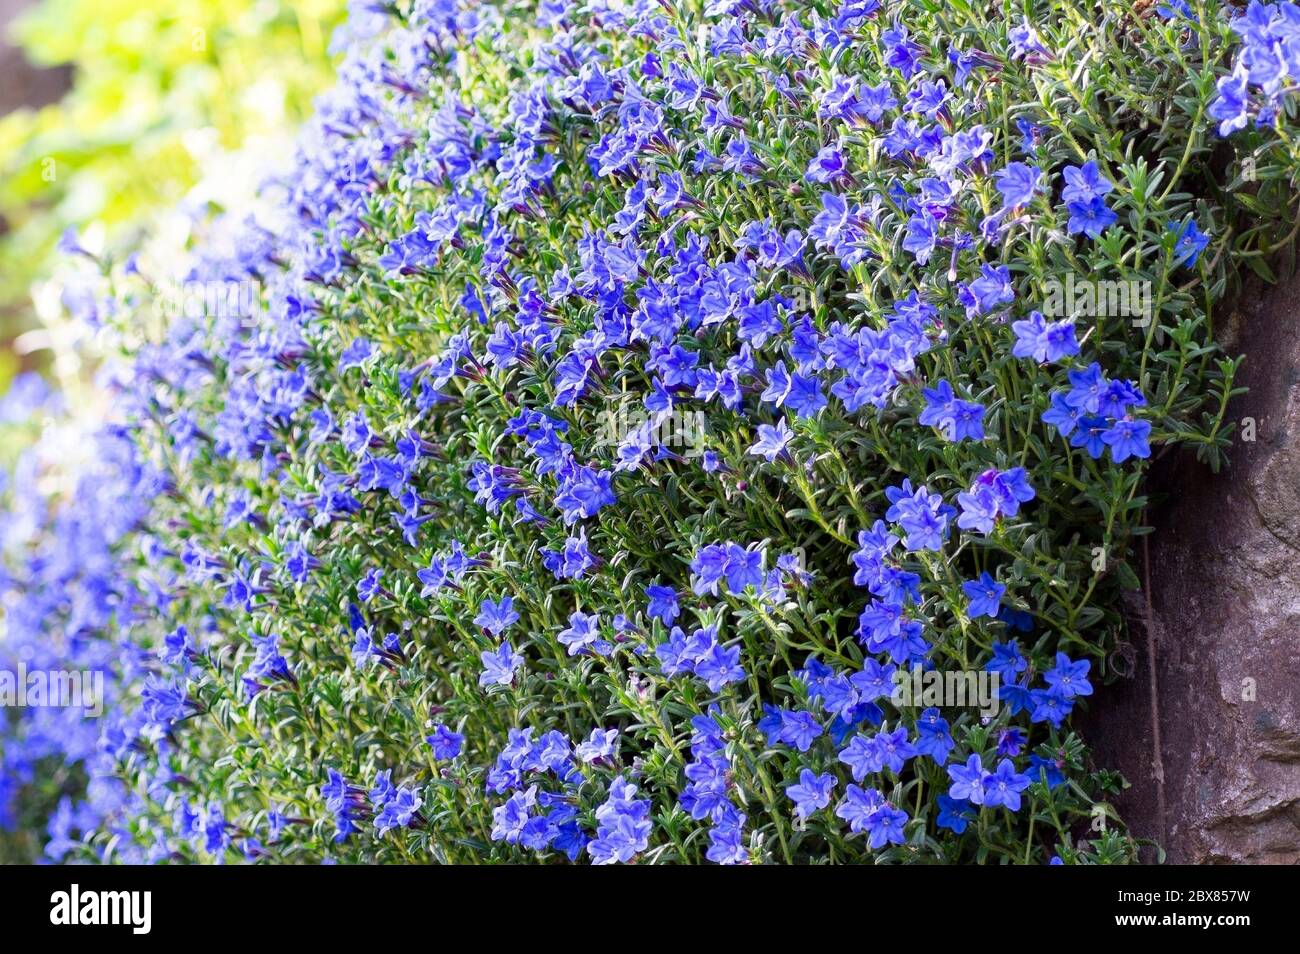 Lithodora plant with small bright blue flowers is covering the garden slope. Stock Photo